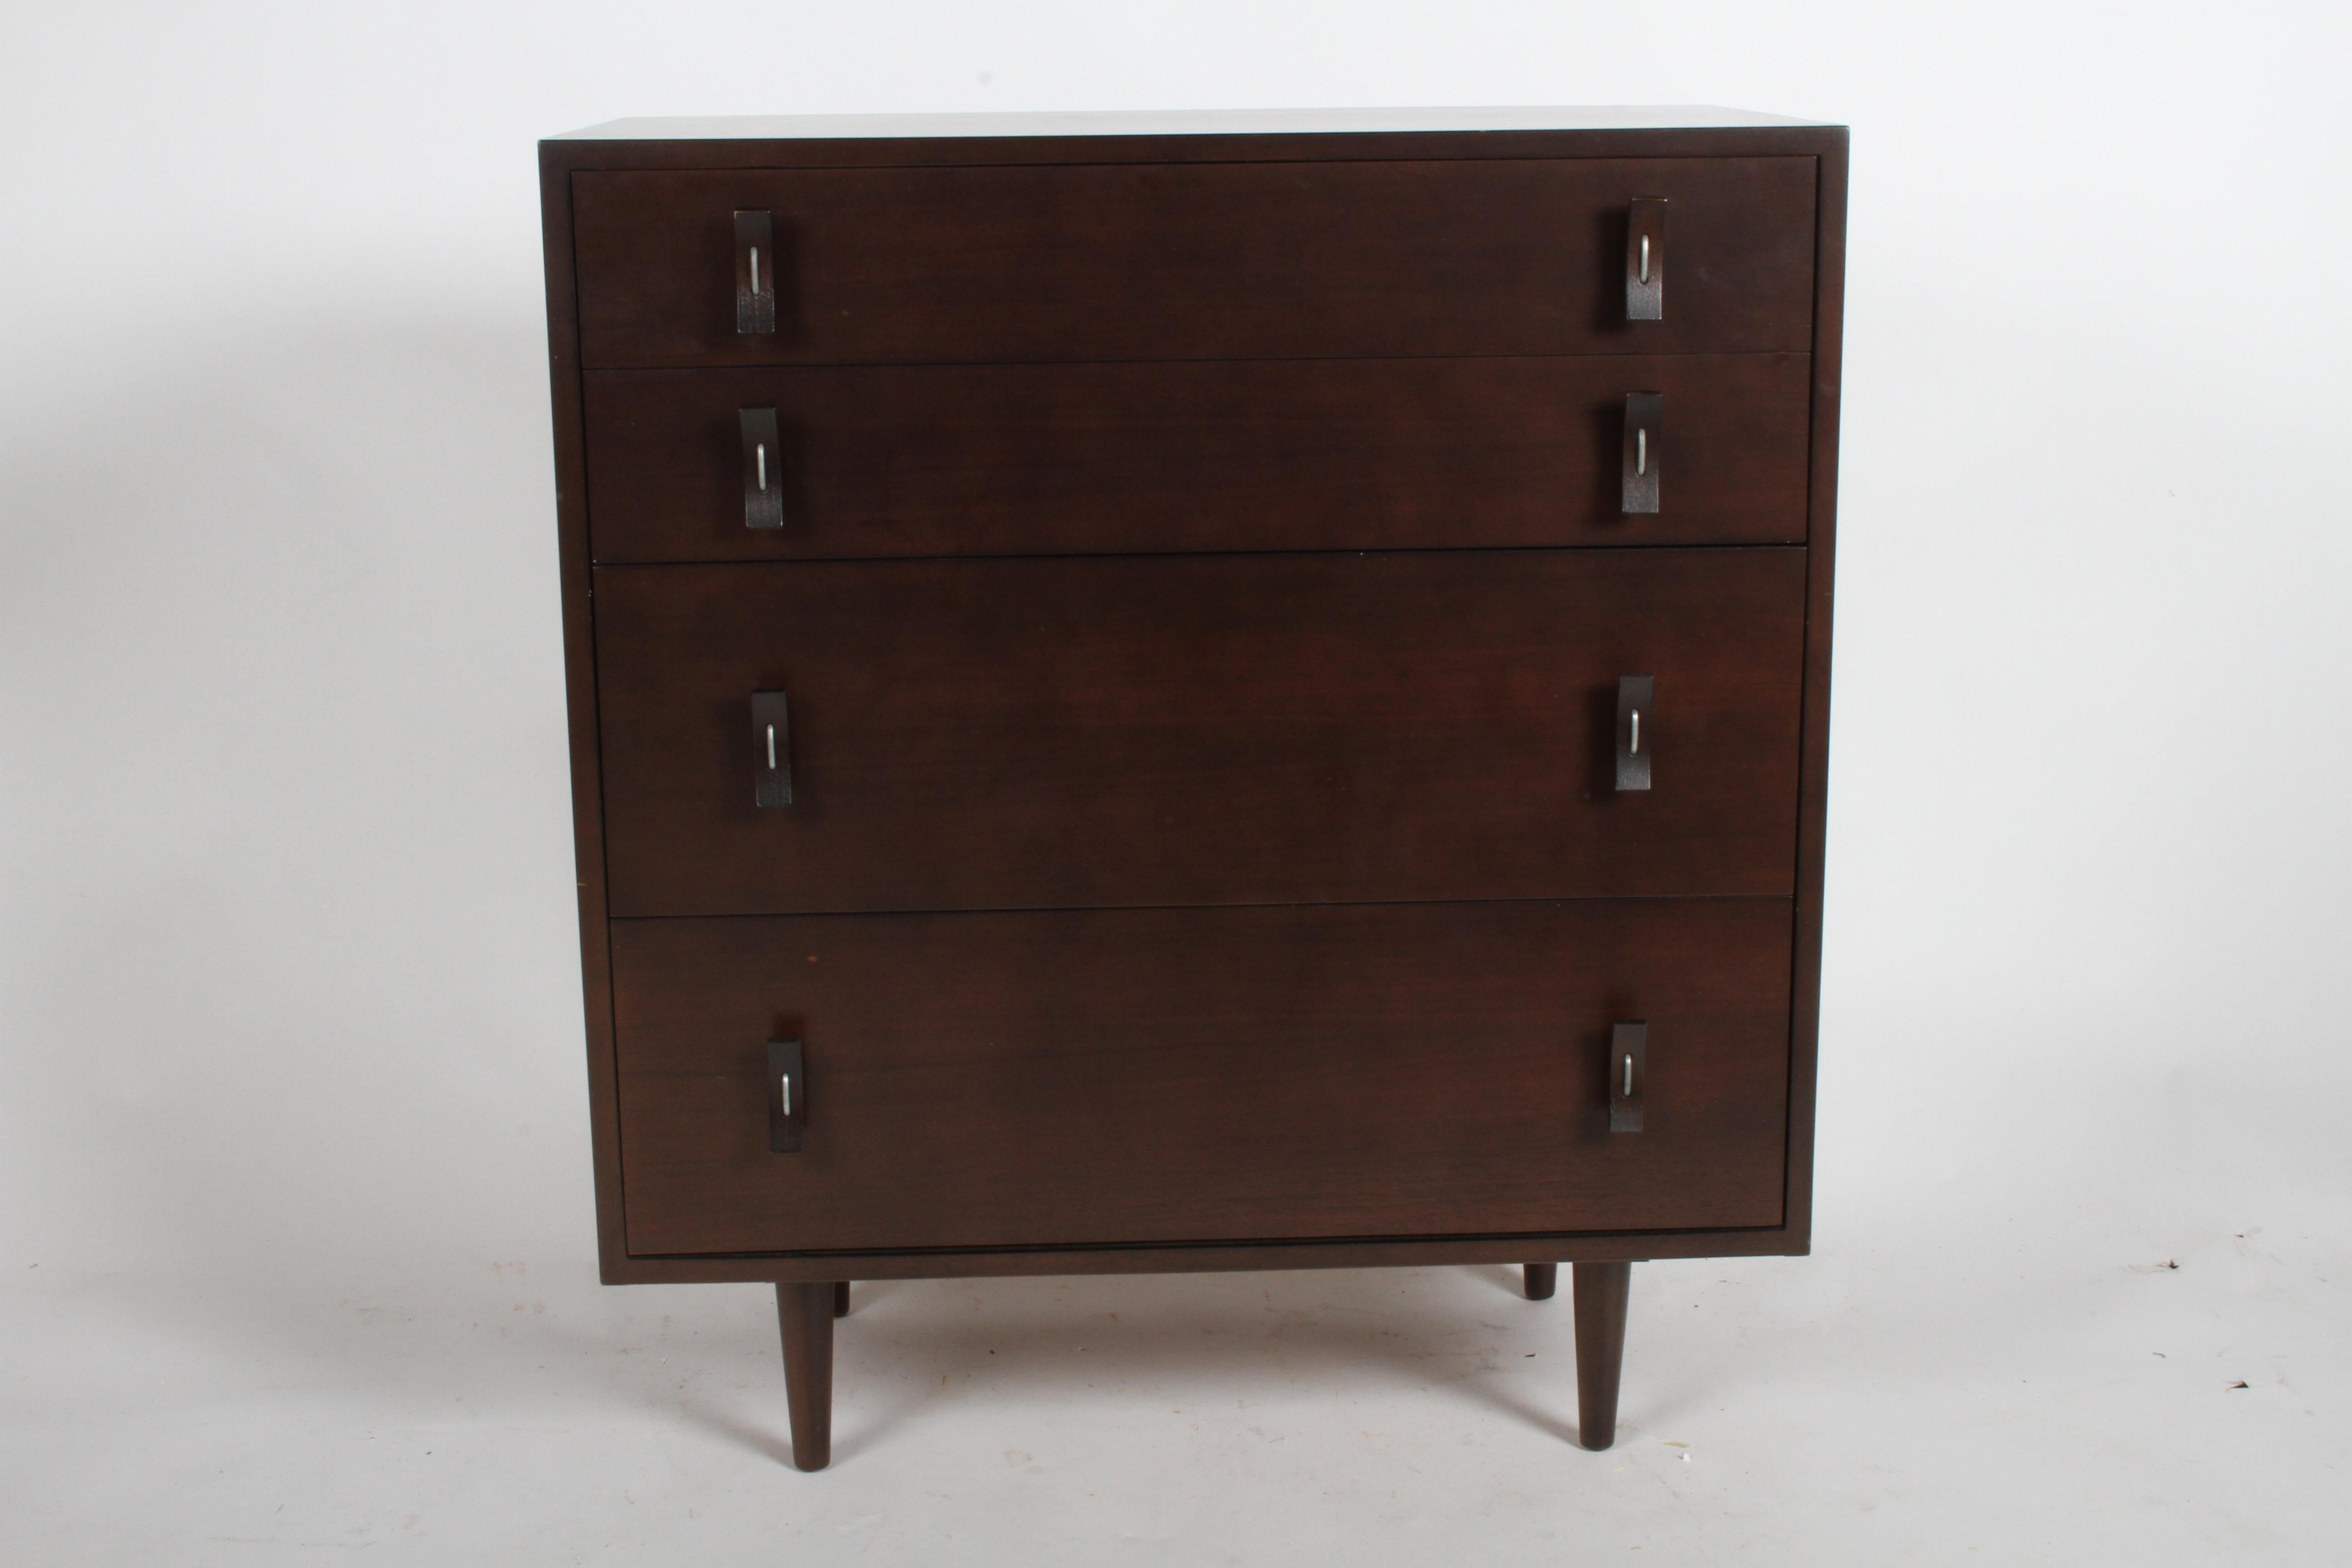 Mid-Century Modern Stanley young for Glenn of California four drawer chest of drawers on tapered dowel legs, walnut refinished in dark espresso with handles of aluminum and bentwood. 1st and 2nd drawer are 3-1/8